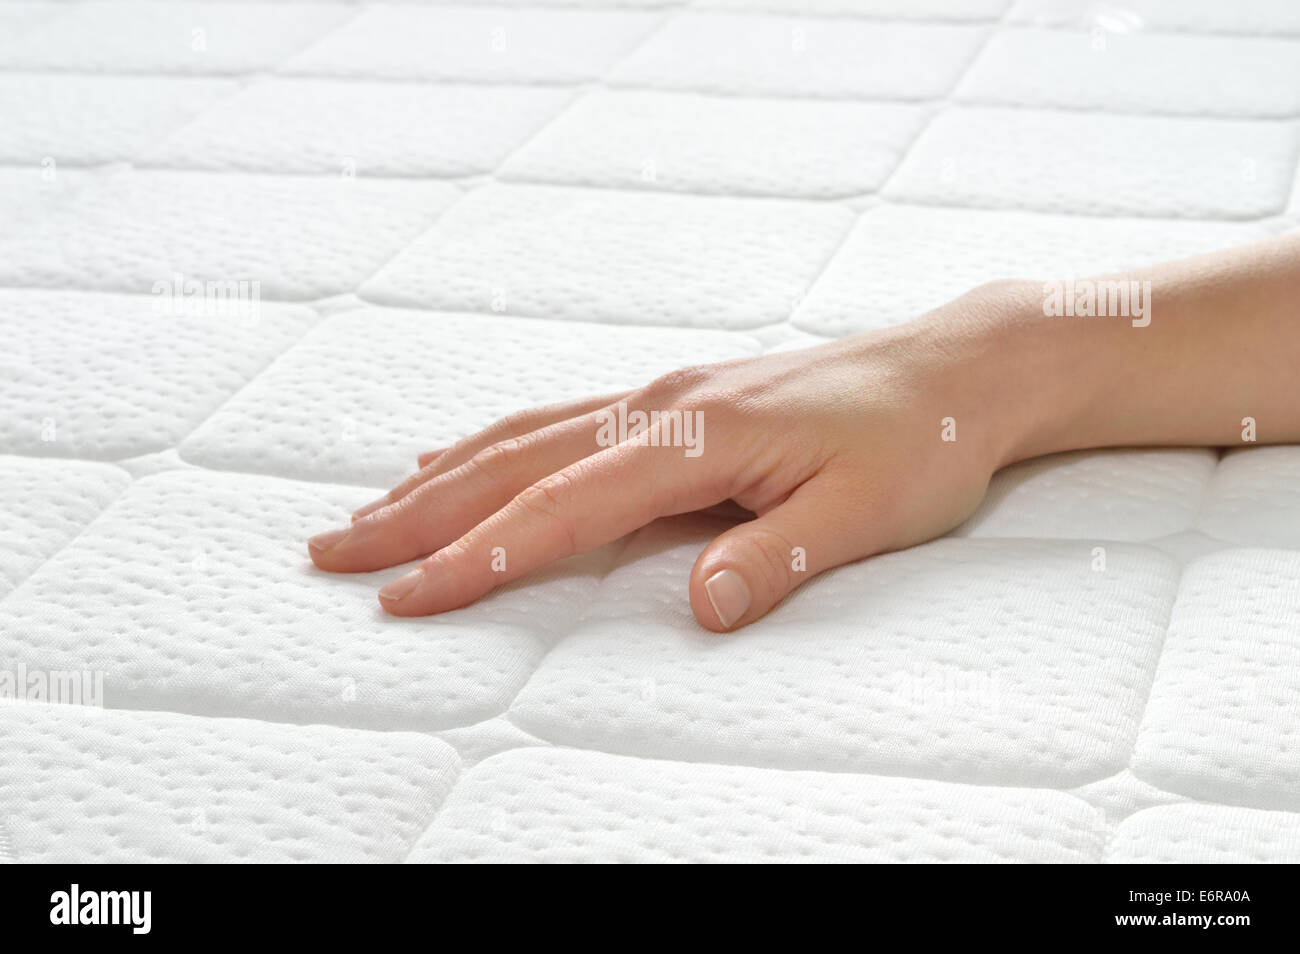 Choosing mattress and bed. Close-up of female hand touching and testing mattress in a store. Copy space. Stock Photo